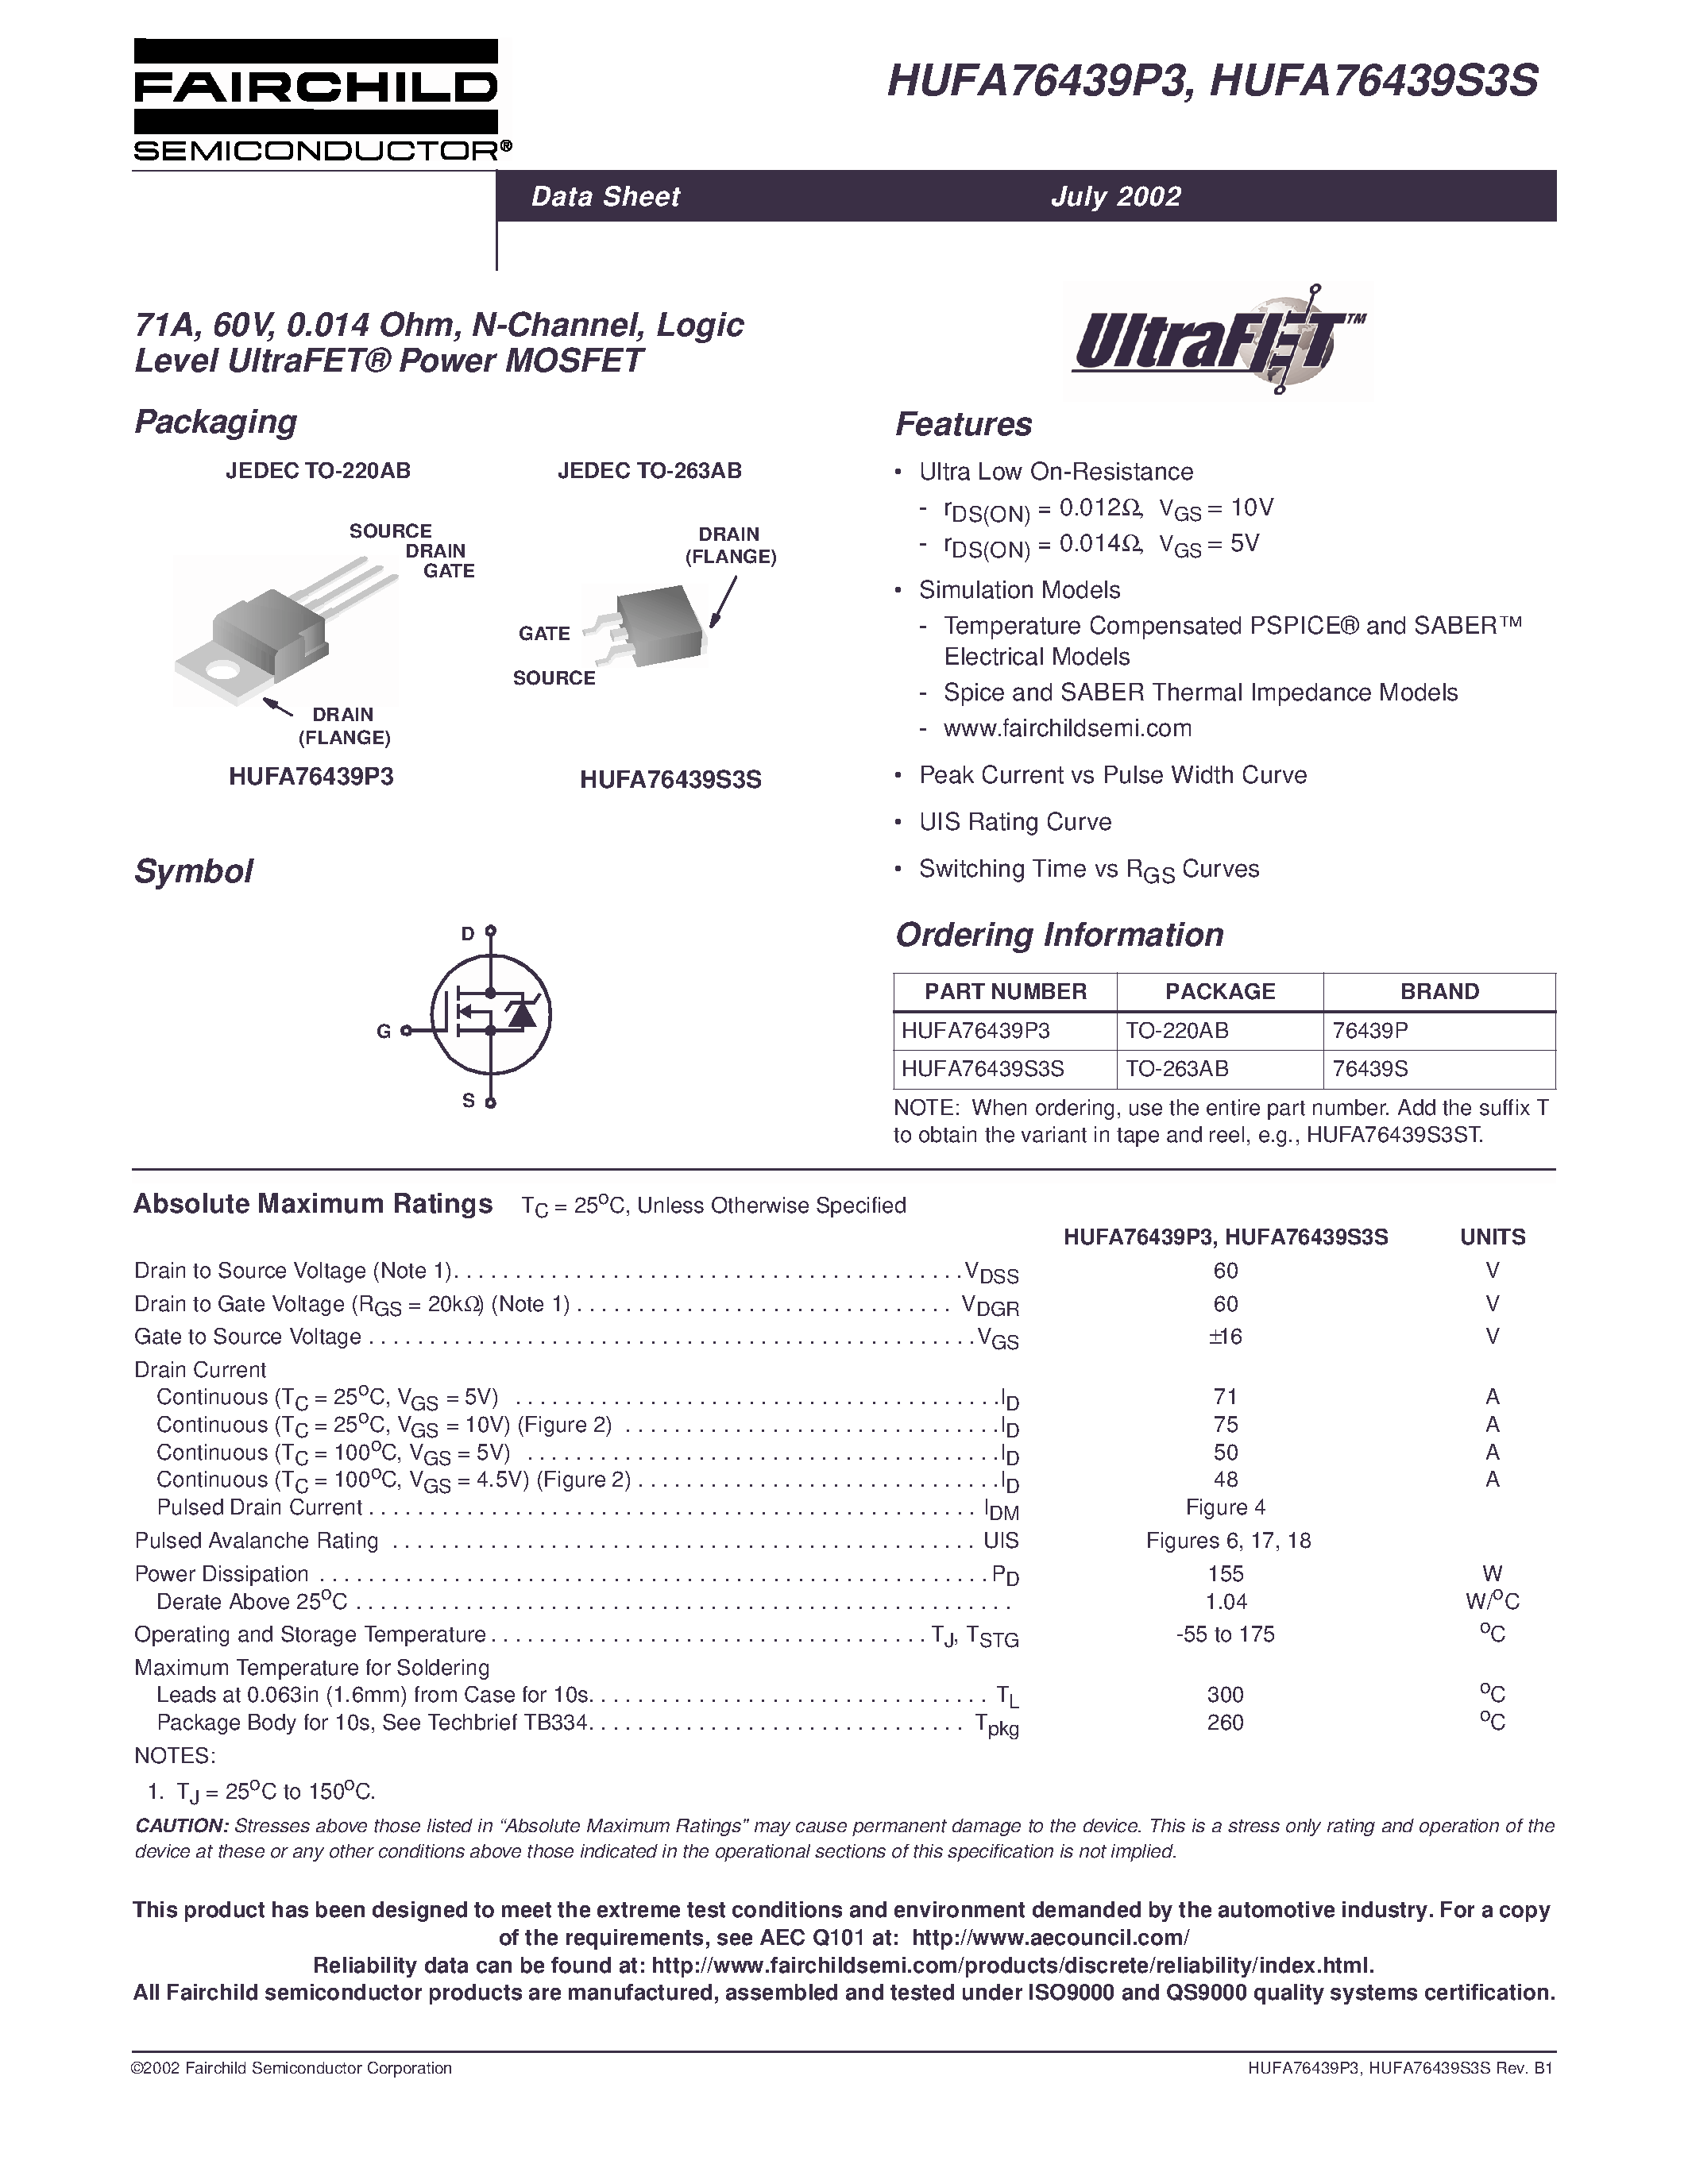 Datasheet HUFA76439S3S - 71A/ 60V/ 0.014 Ohm/ N-Channel/ Logic Level UltraFET Power MOSFET page 1